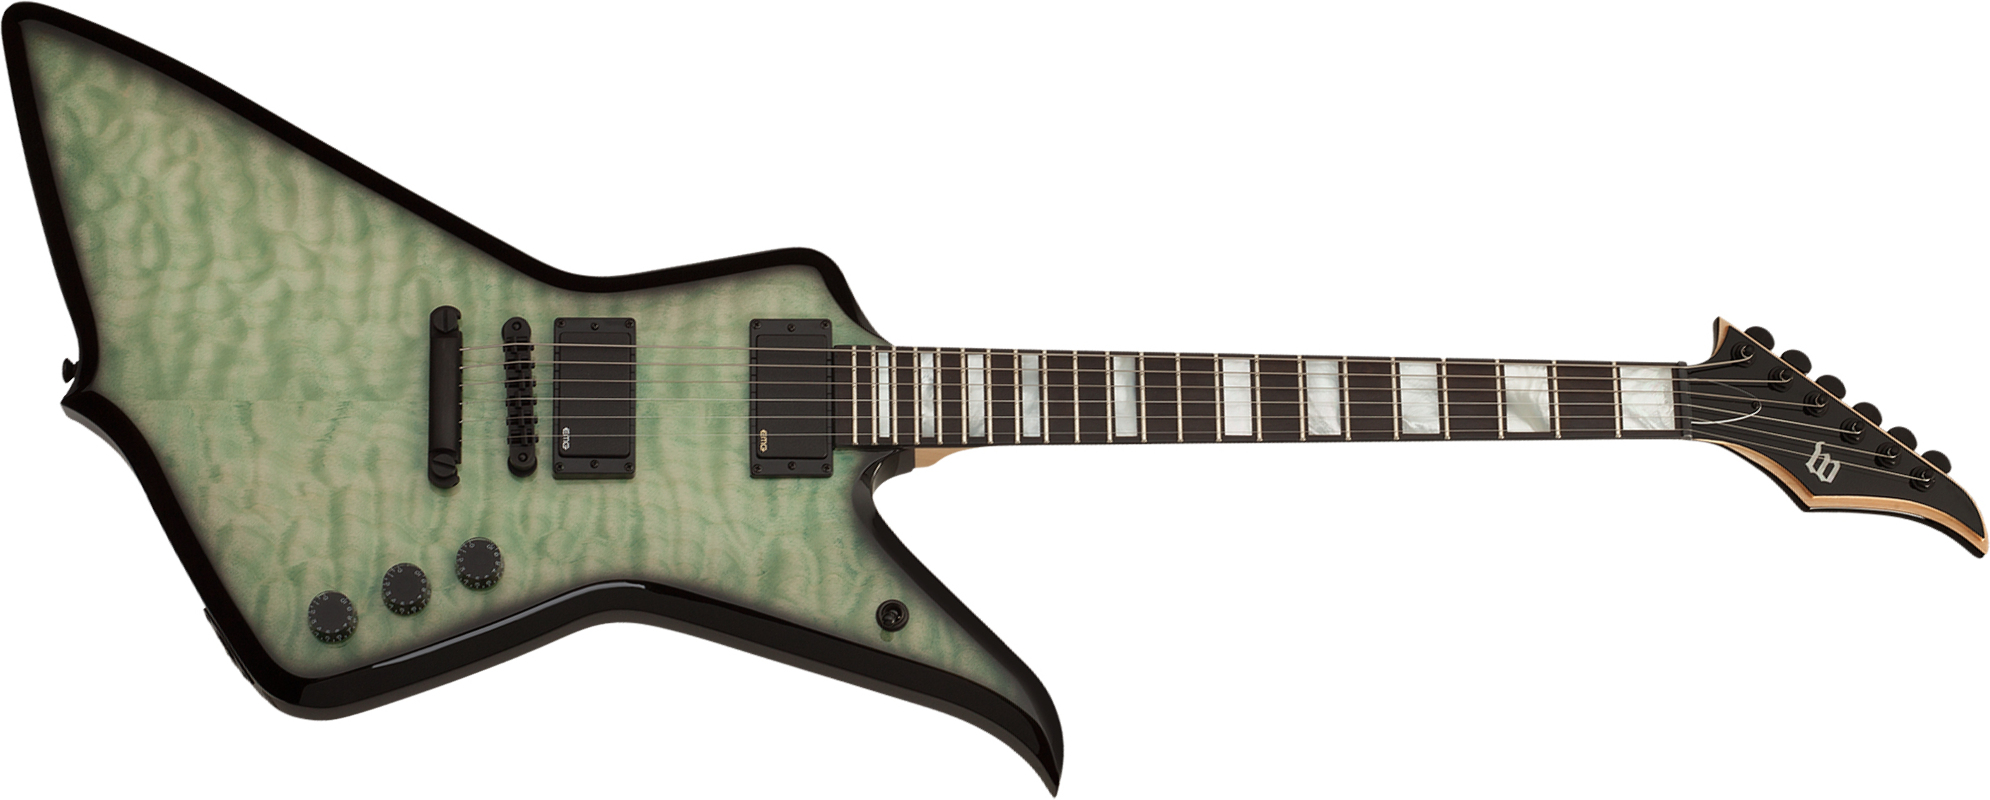 Wylde Audio Blood Eagle Hh Ht Eb - Nordic Ice - Metal electric guitar - Main picture